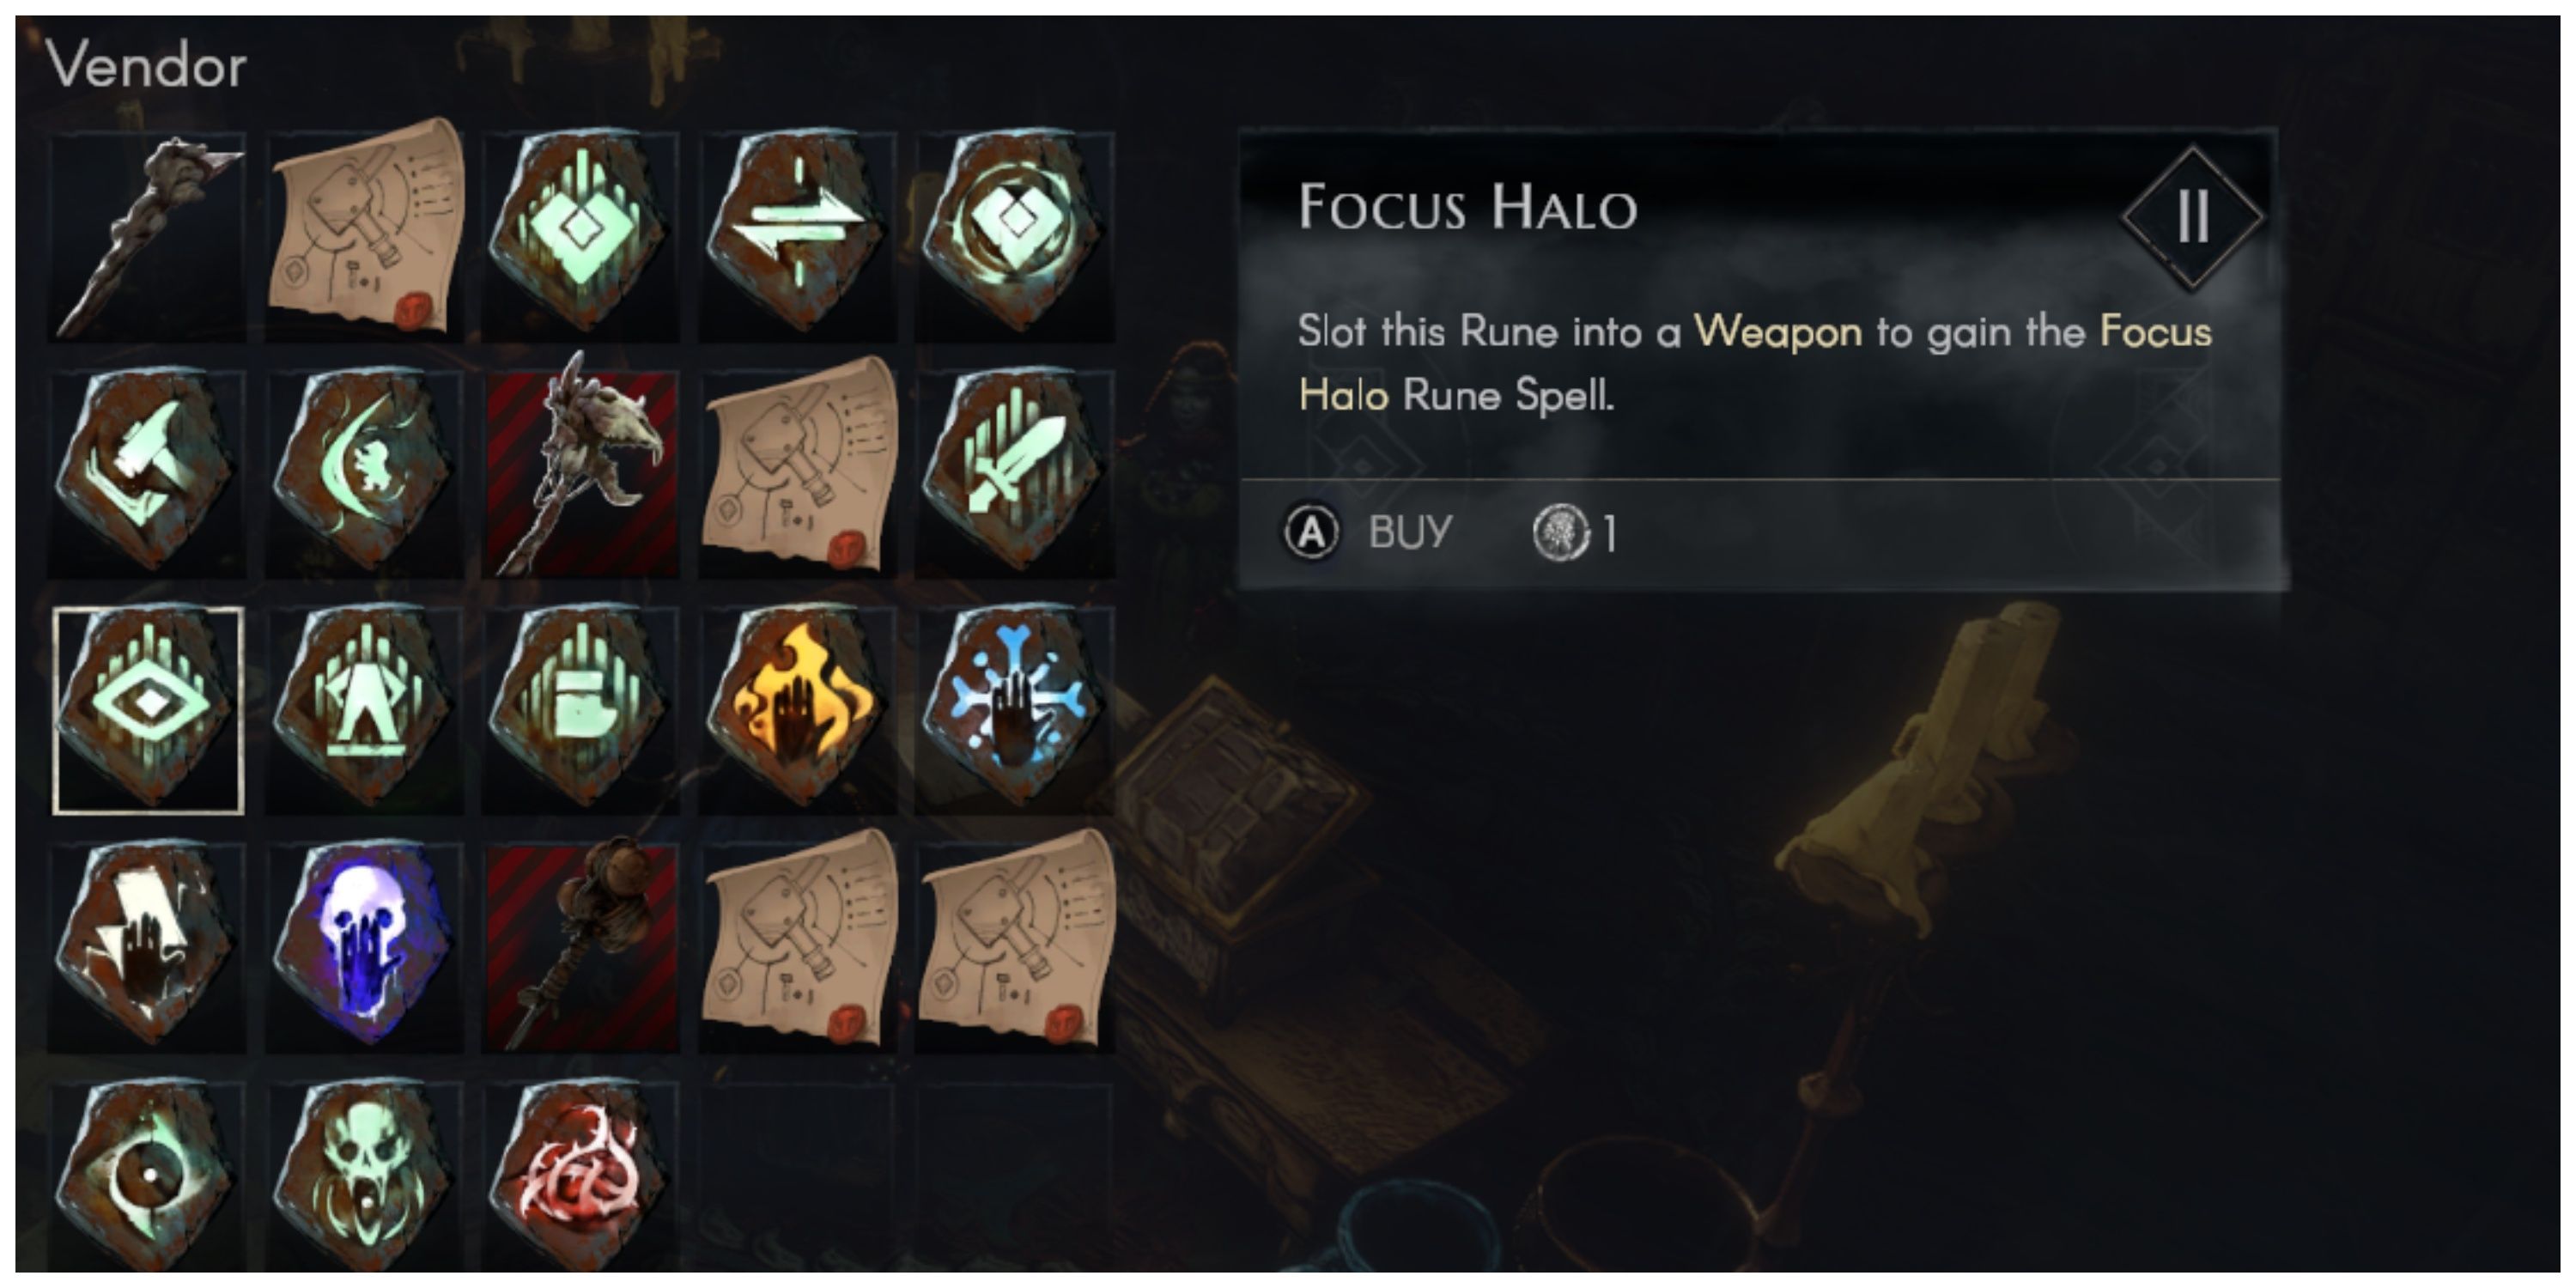 No Rest For The Wicked - Focus Halo Rune